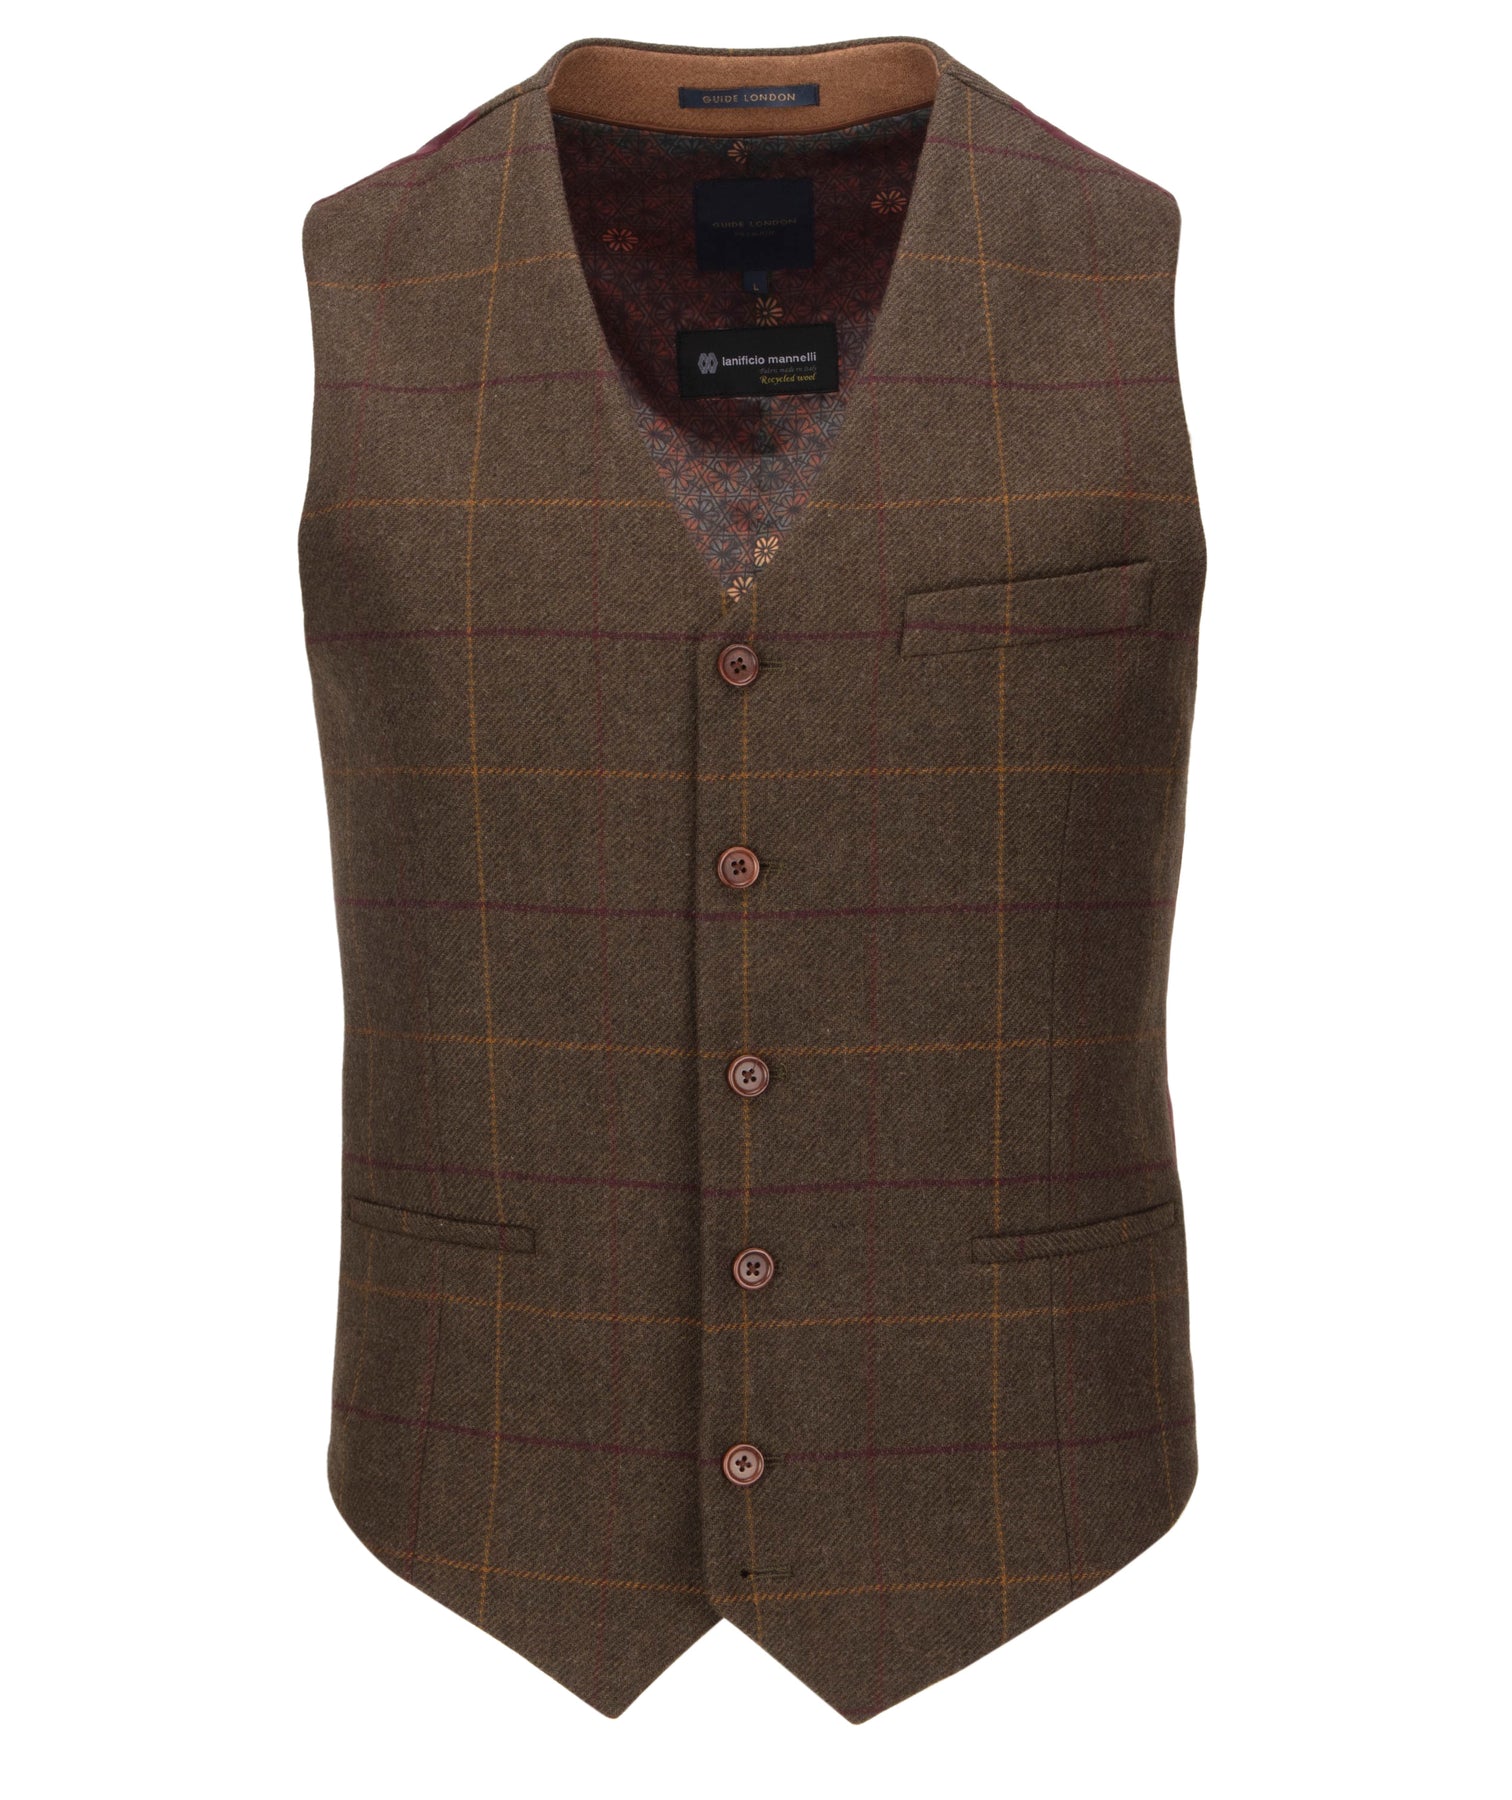 Guide London - Checked Waistcoat - Olive